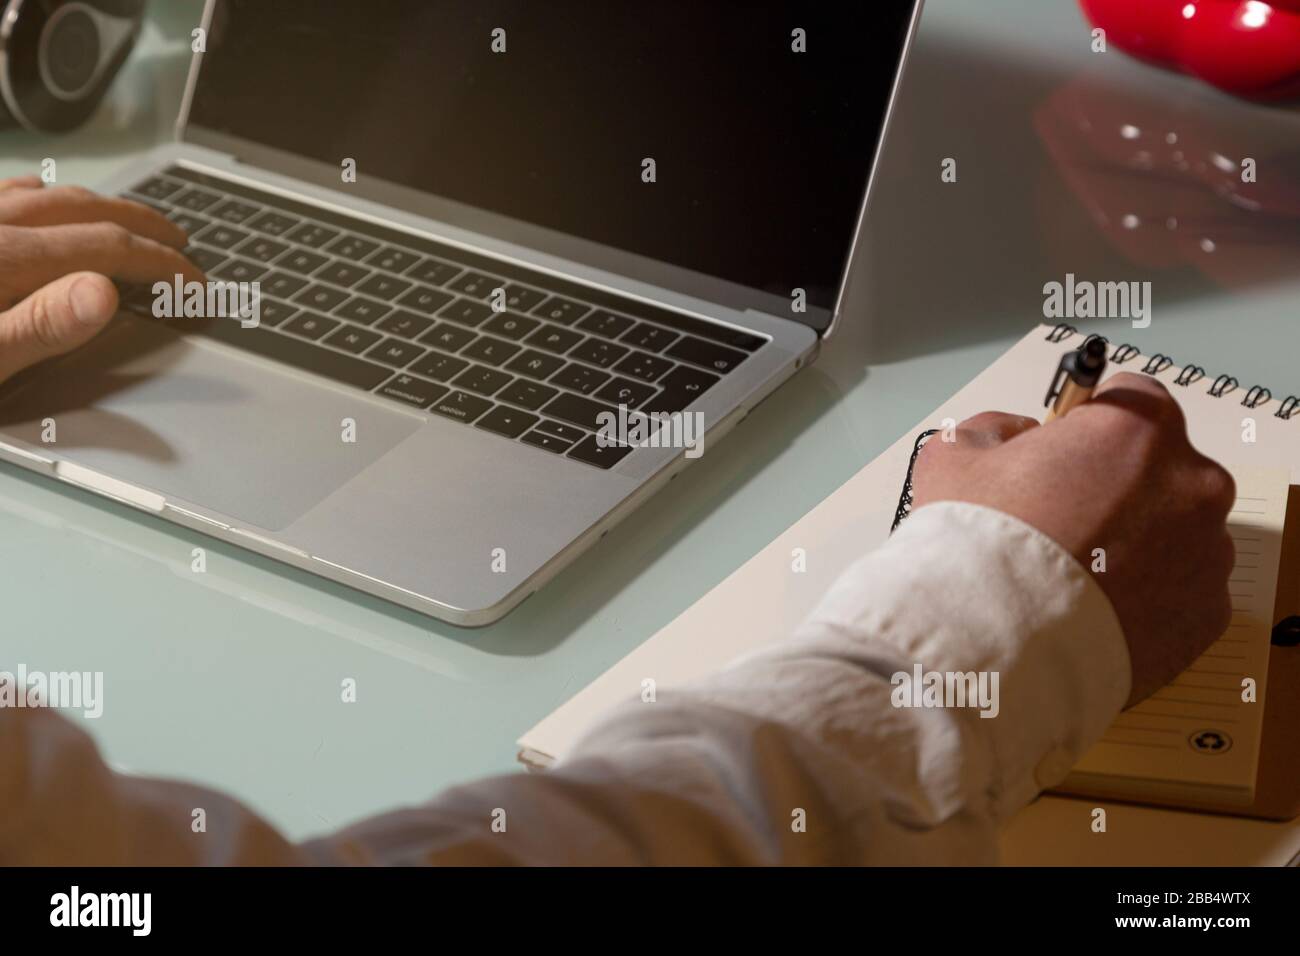 The hands of a businessman man who uses the laptop and takes notes working from home. Note pad and pen on the table. Telework concept Stock Photo